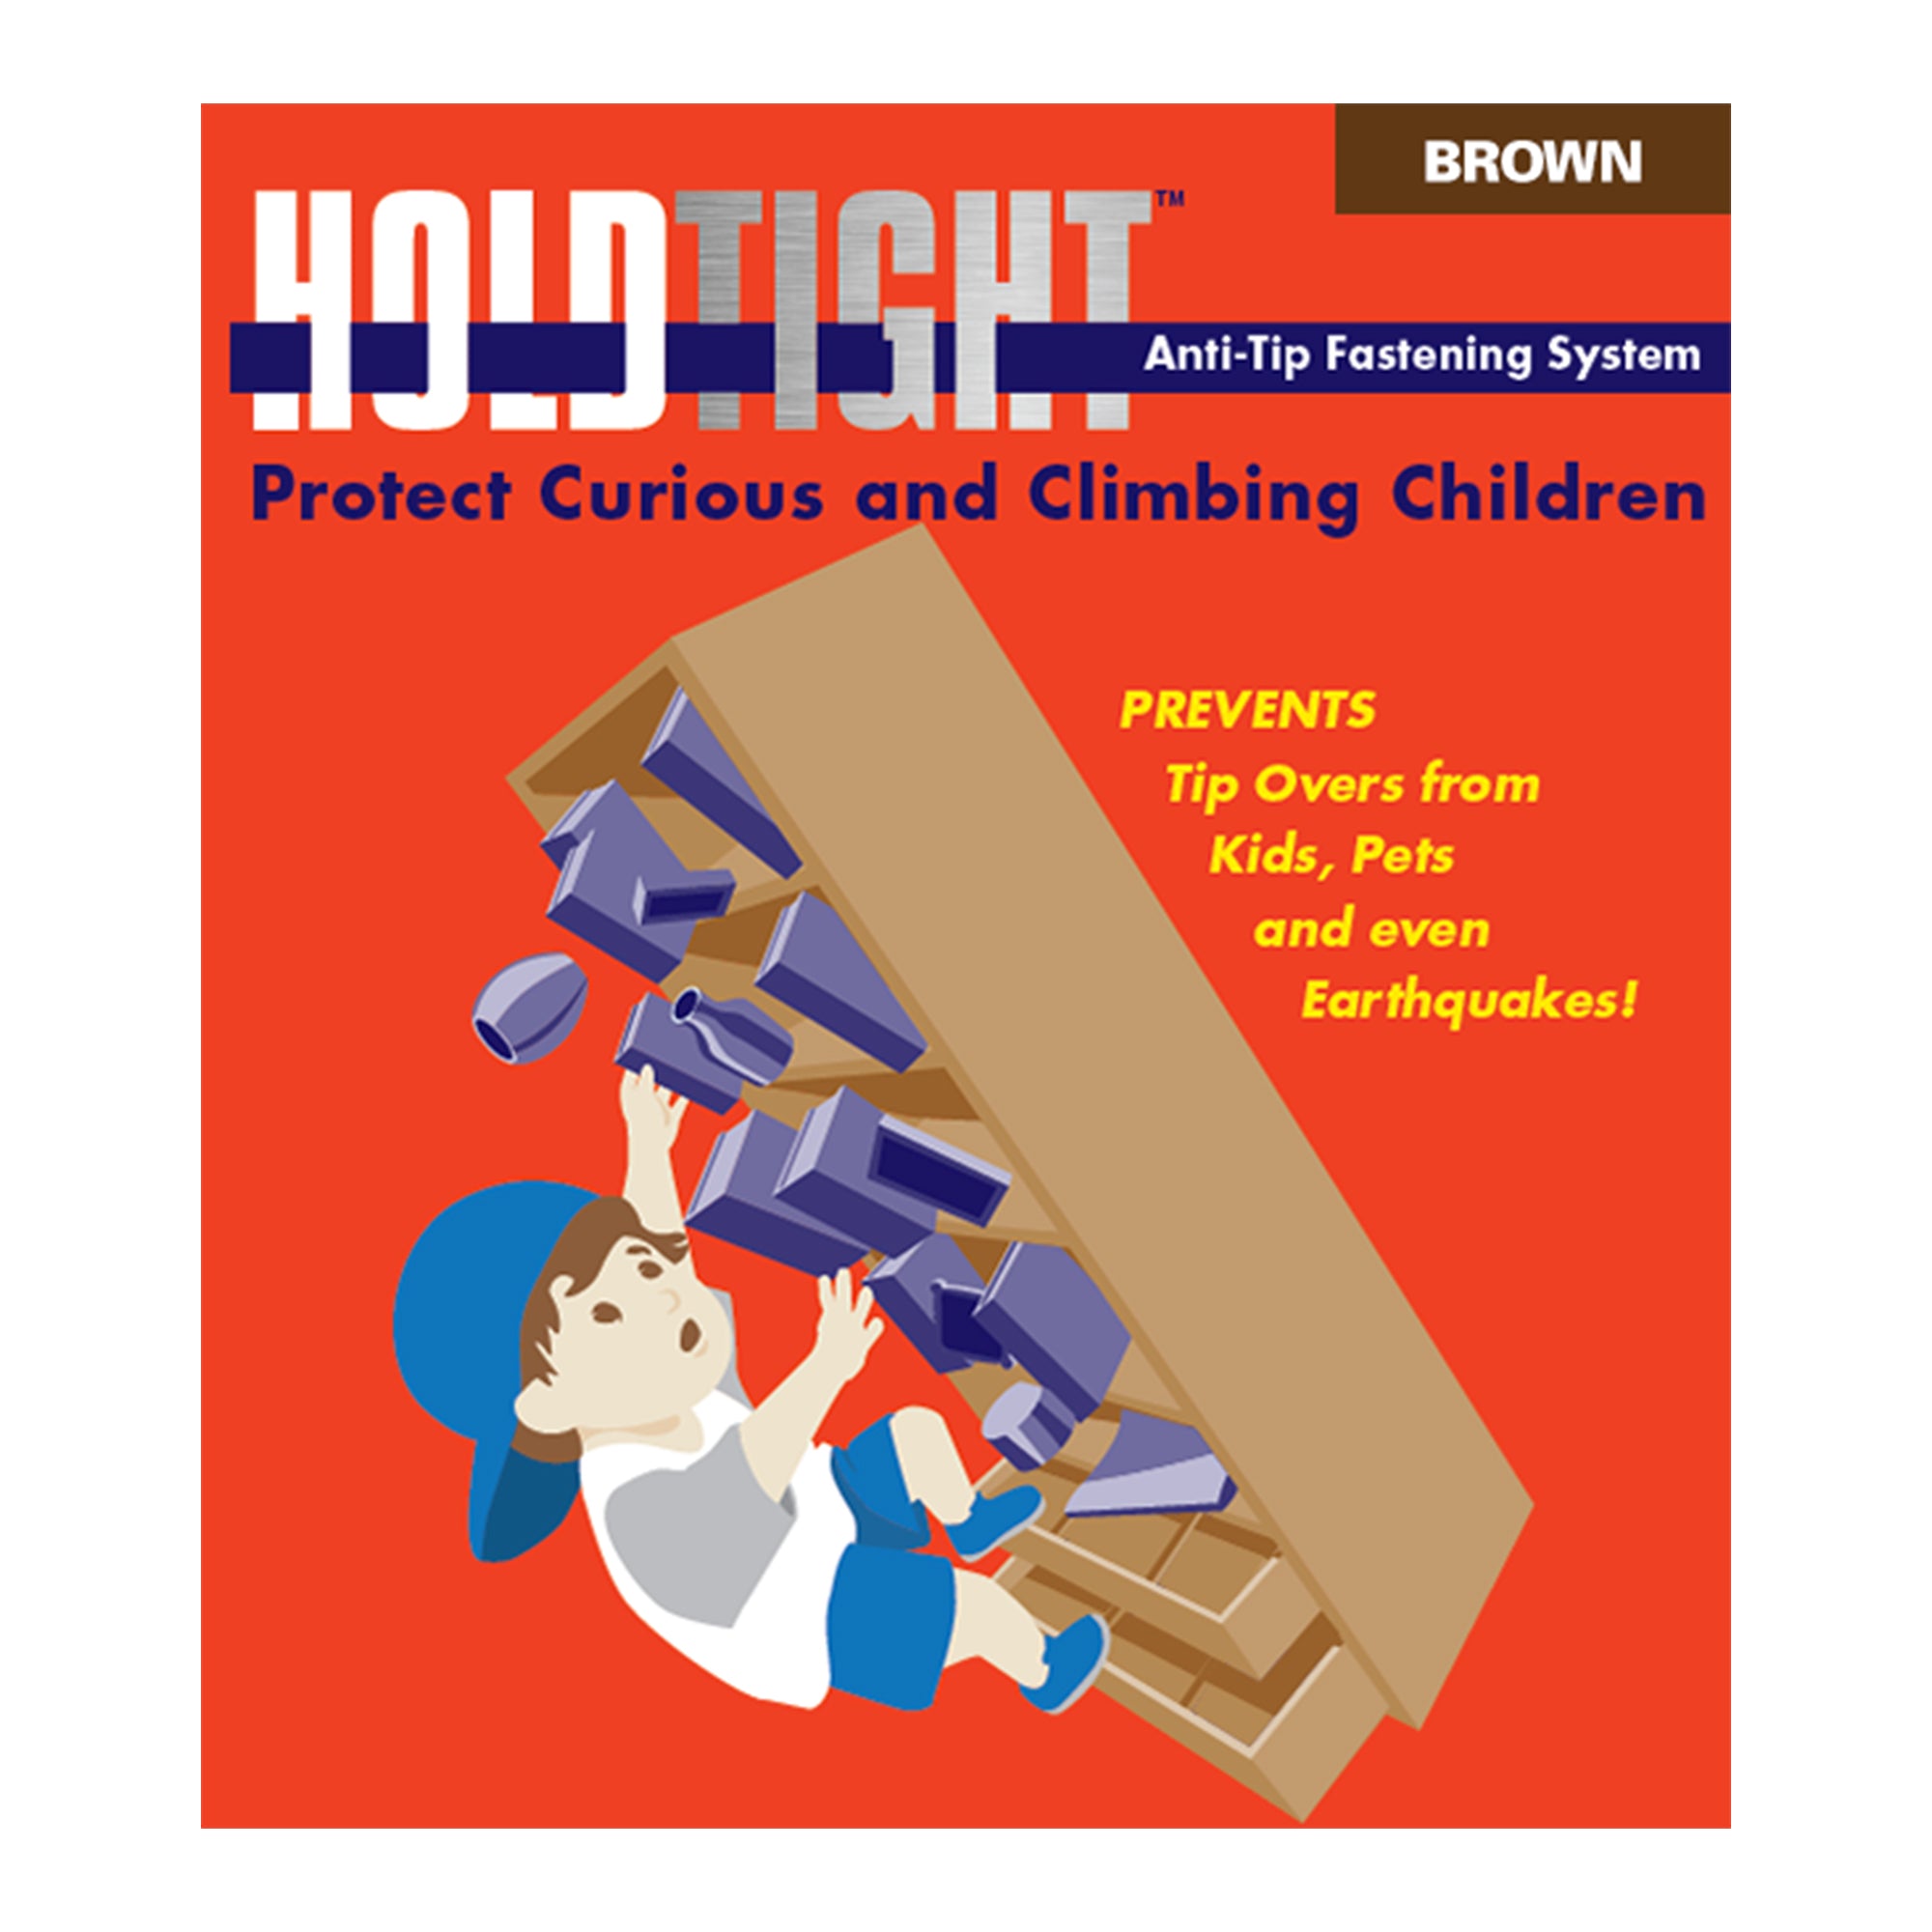 Hold Tight, Furniture, Bookcase, File Cabinet, Anti-Tip Earthquake Fastener, Family Preparedness, Safety, Emergency Security, brown, stp-ht-201-01-bn